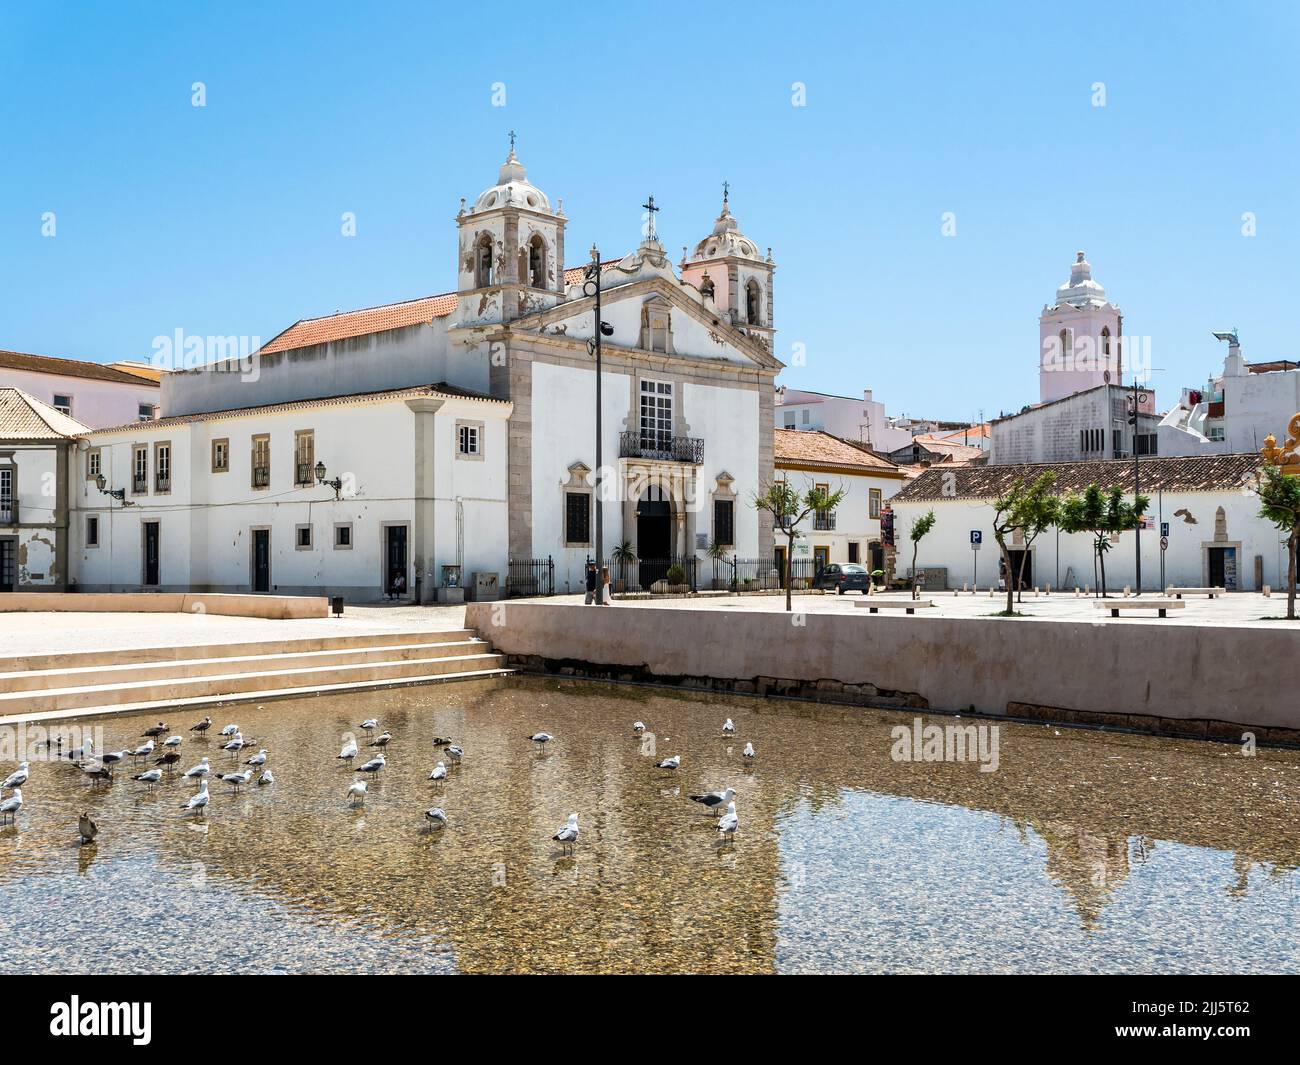 Portugal, Faro District, Lagos, Flock of pigeons standing in coastal water with Republic Square and Church of Santa Maria de Lagos in background Stock Photo